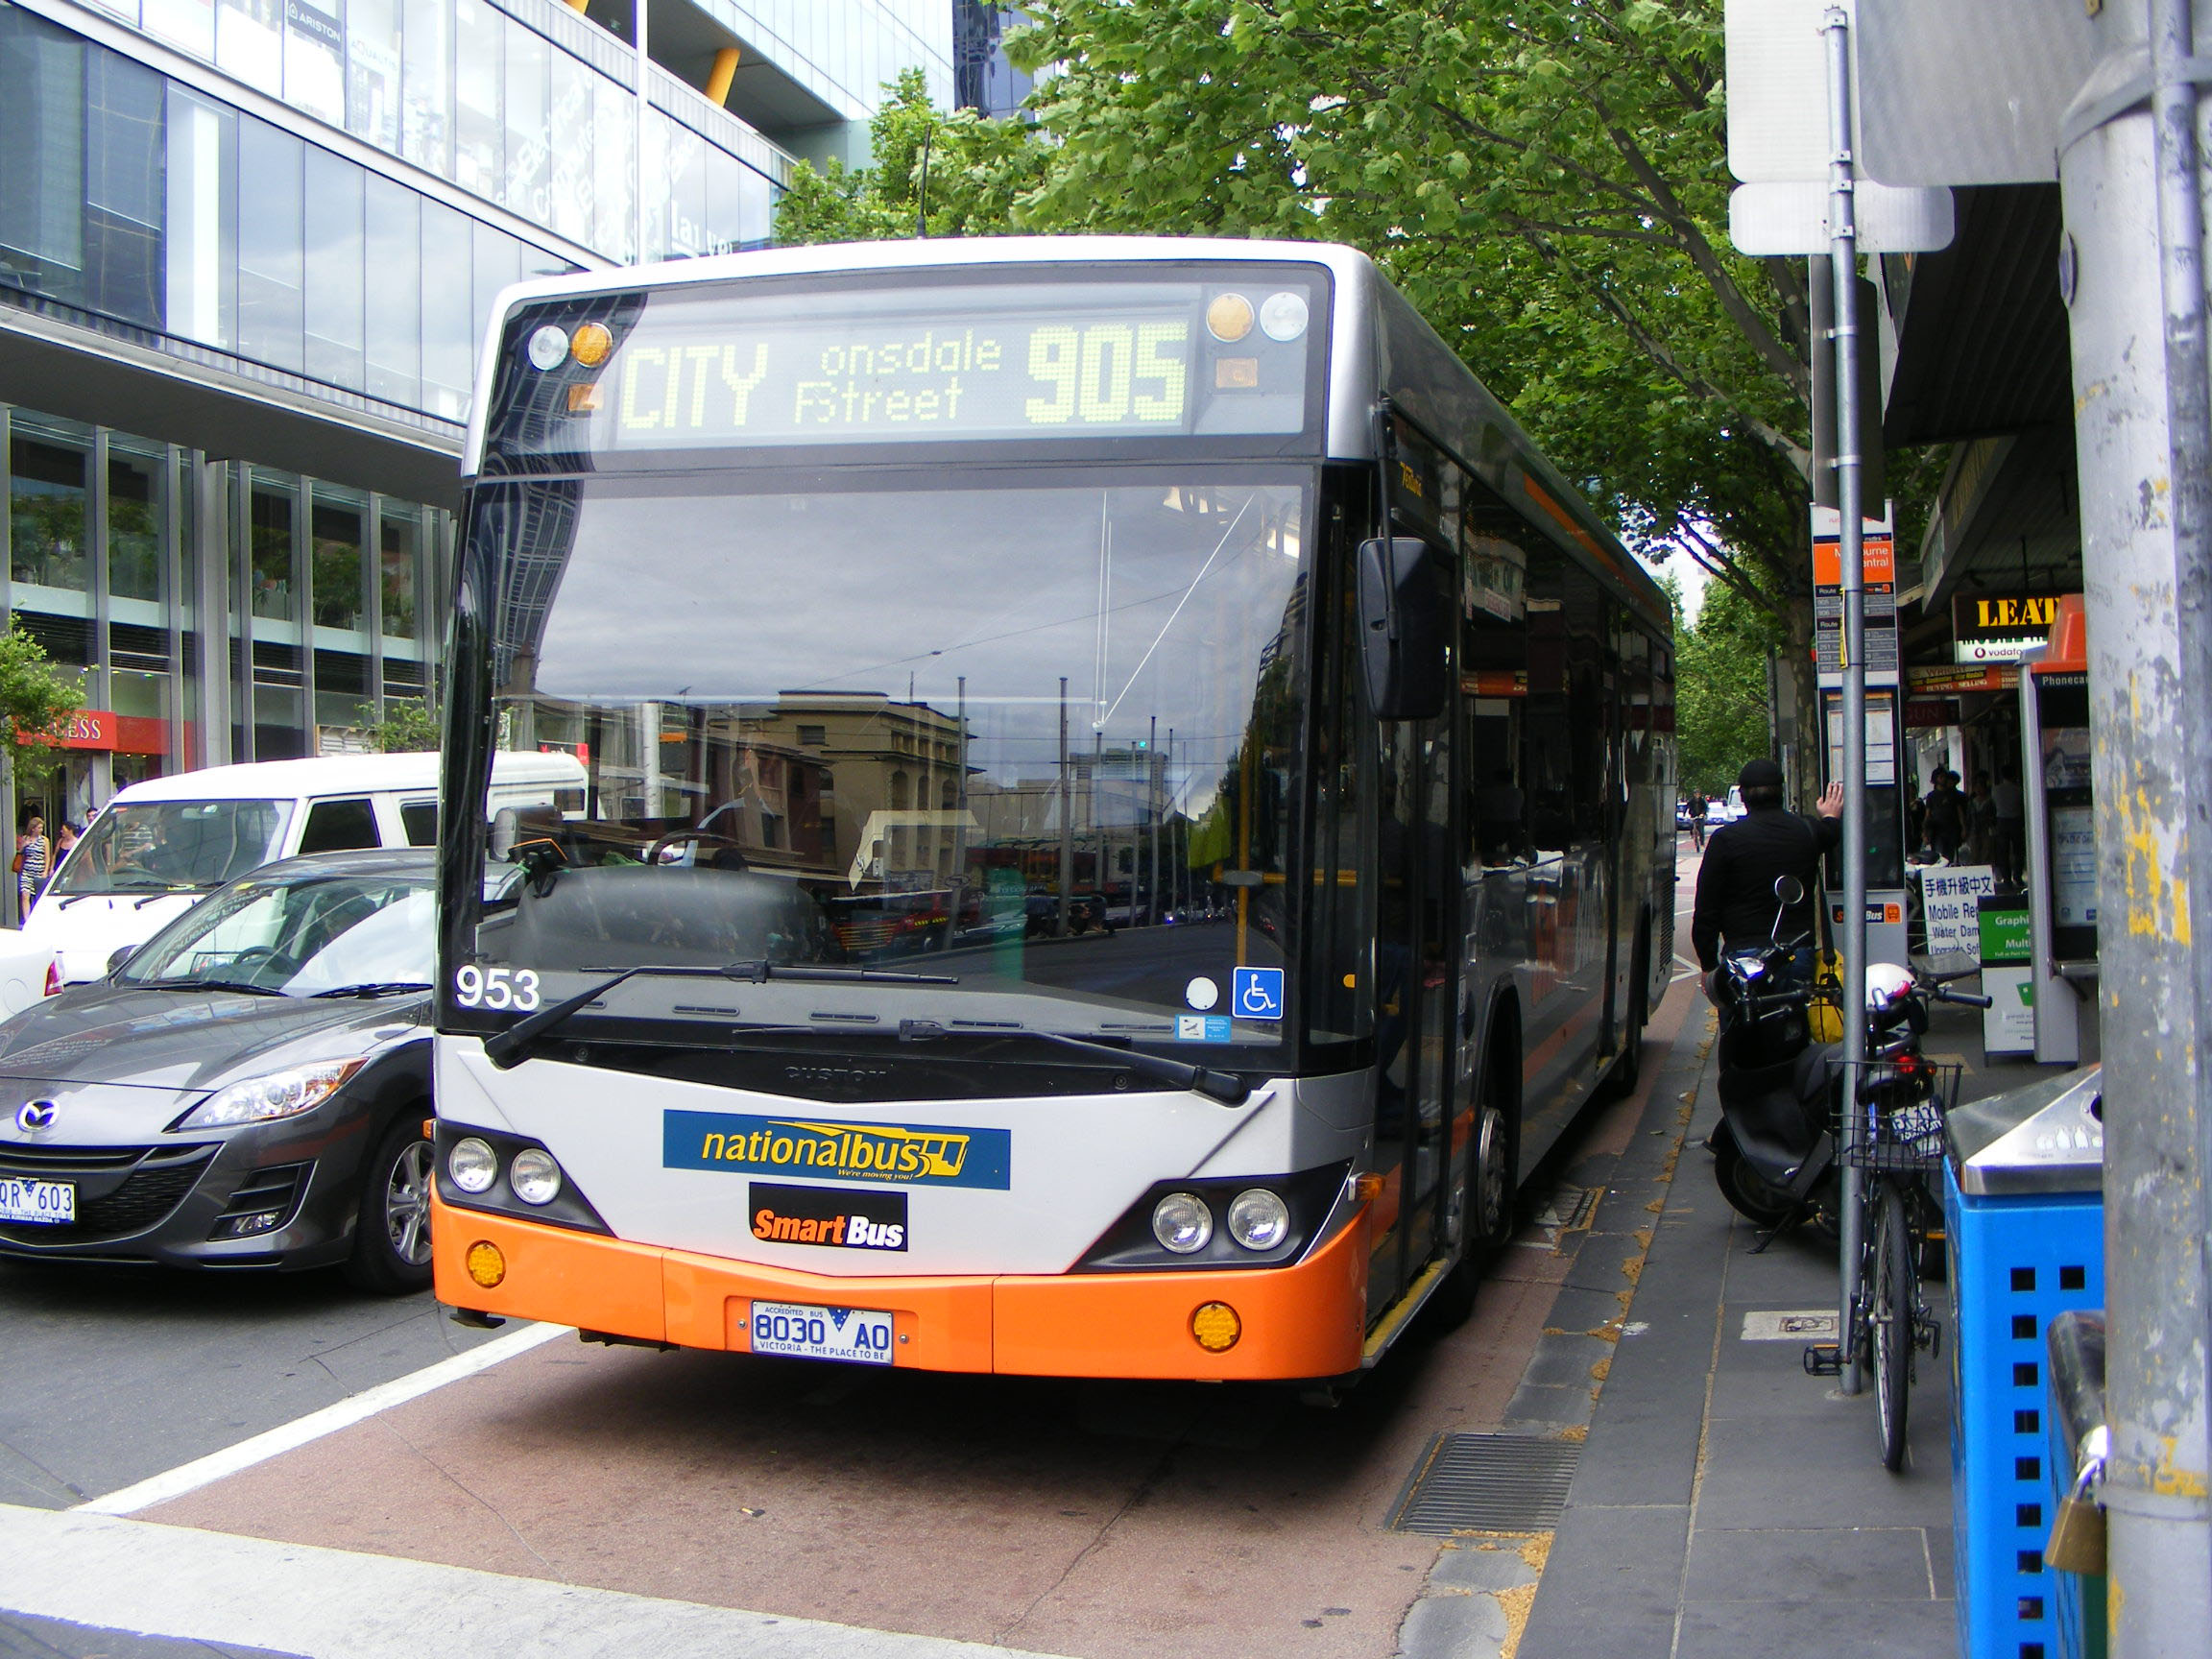 Image of a bus stopped at a bus stop.